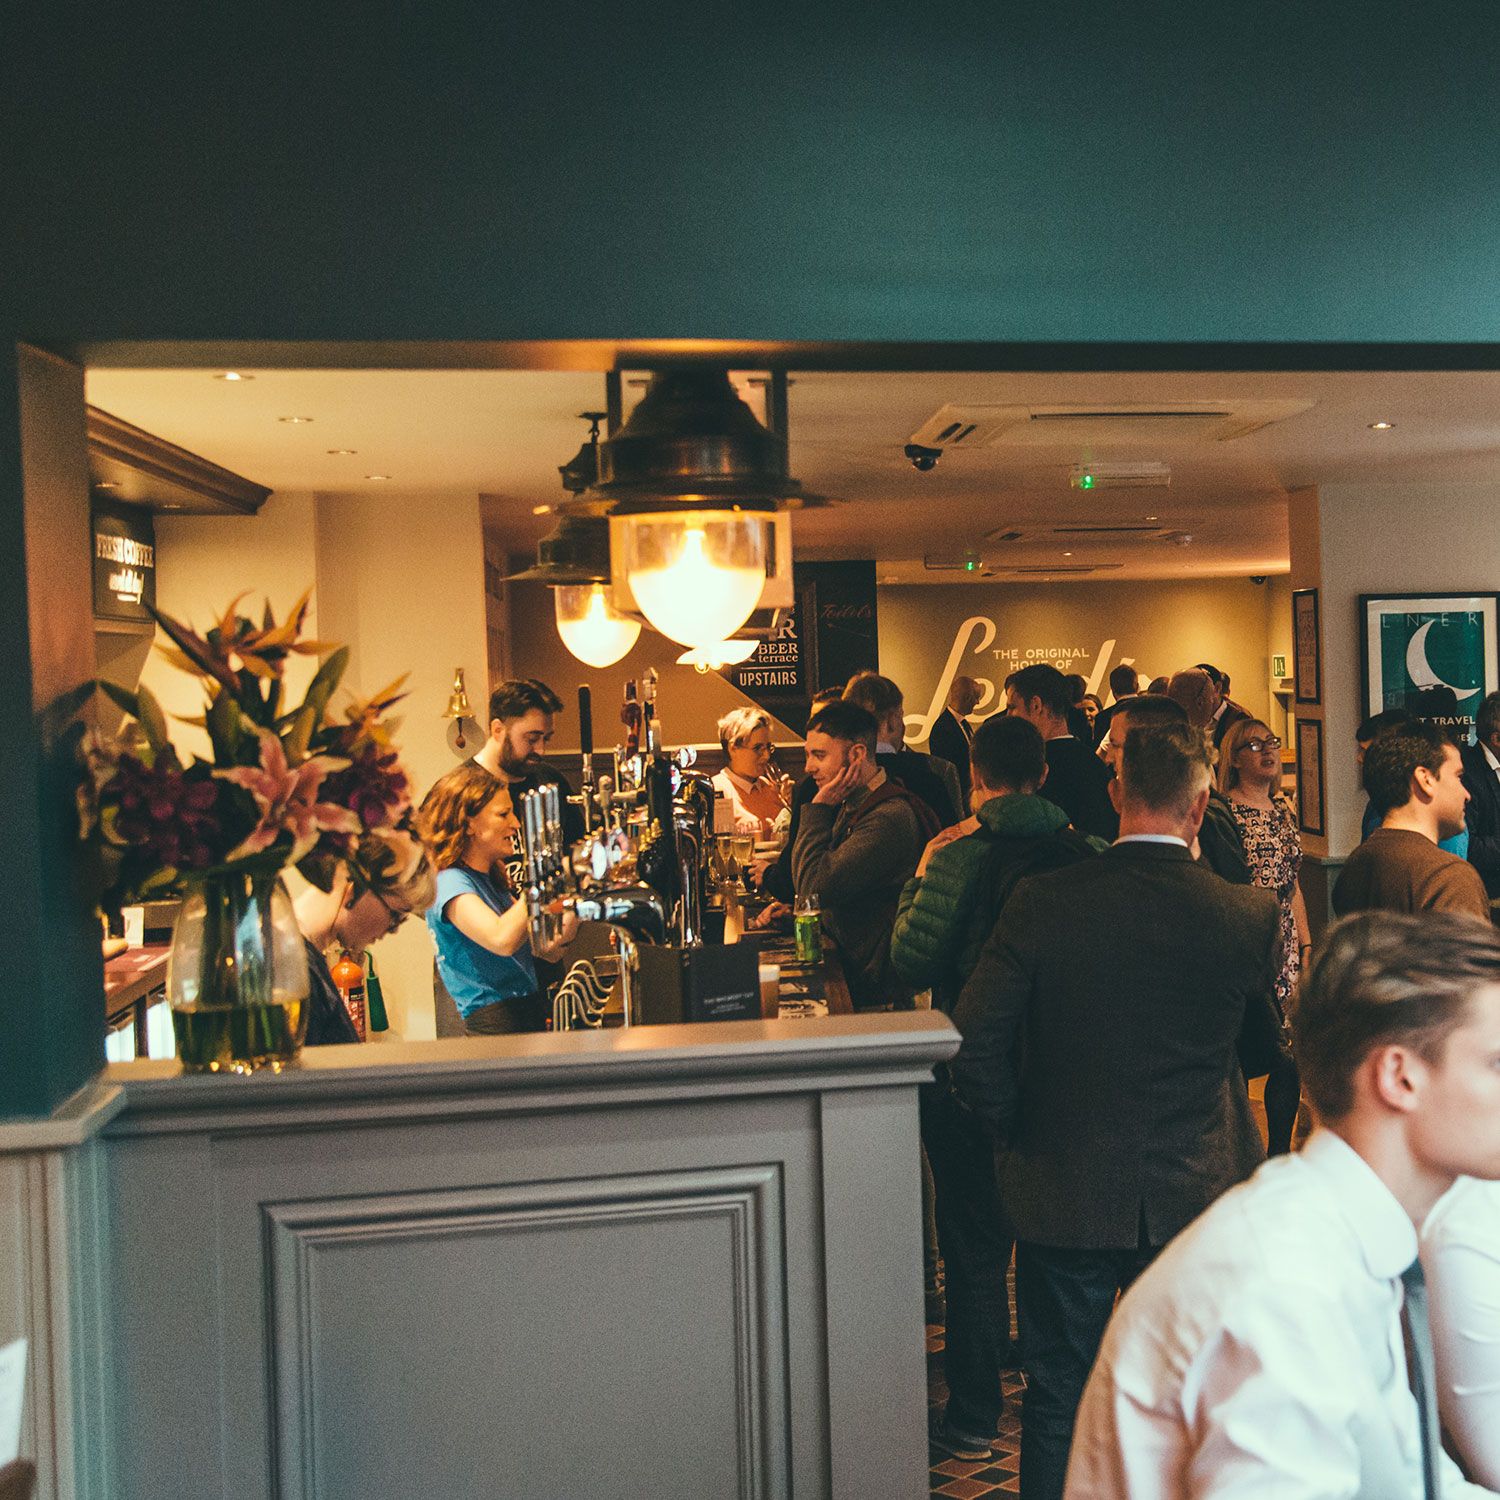 Image of people in Leeds Brewery Tap